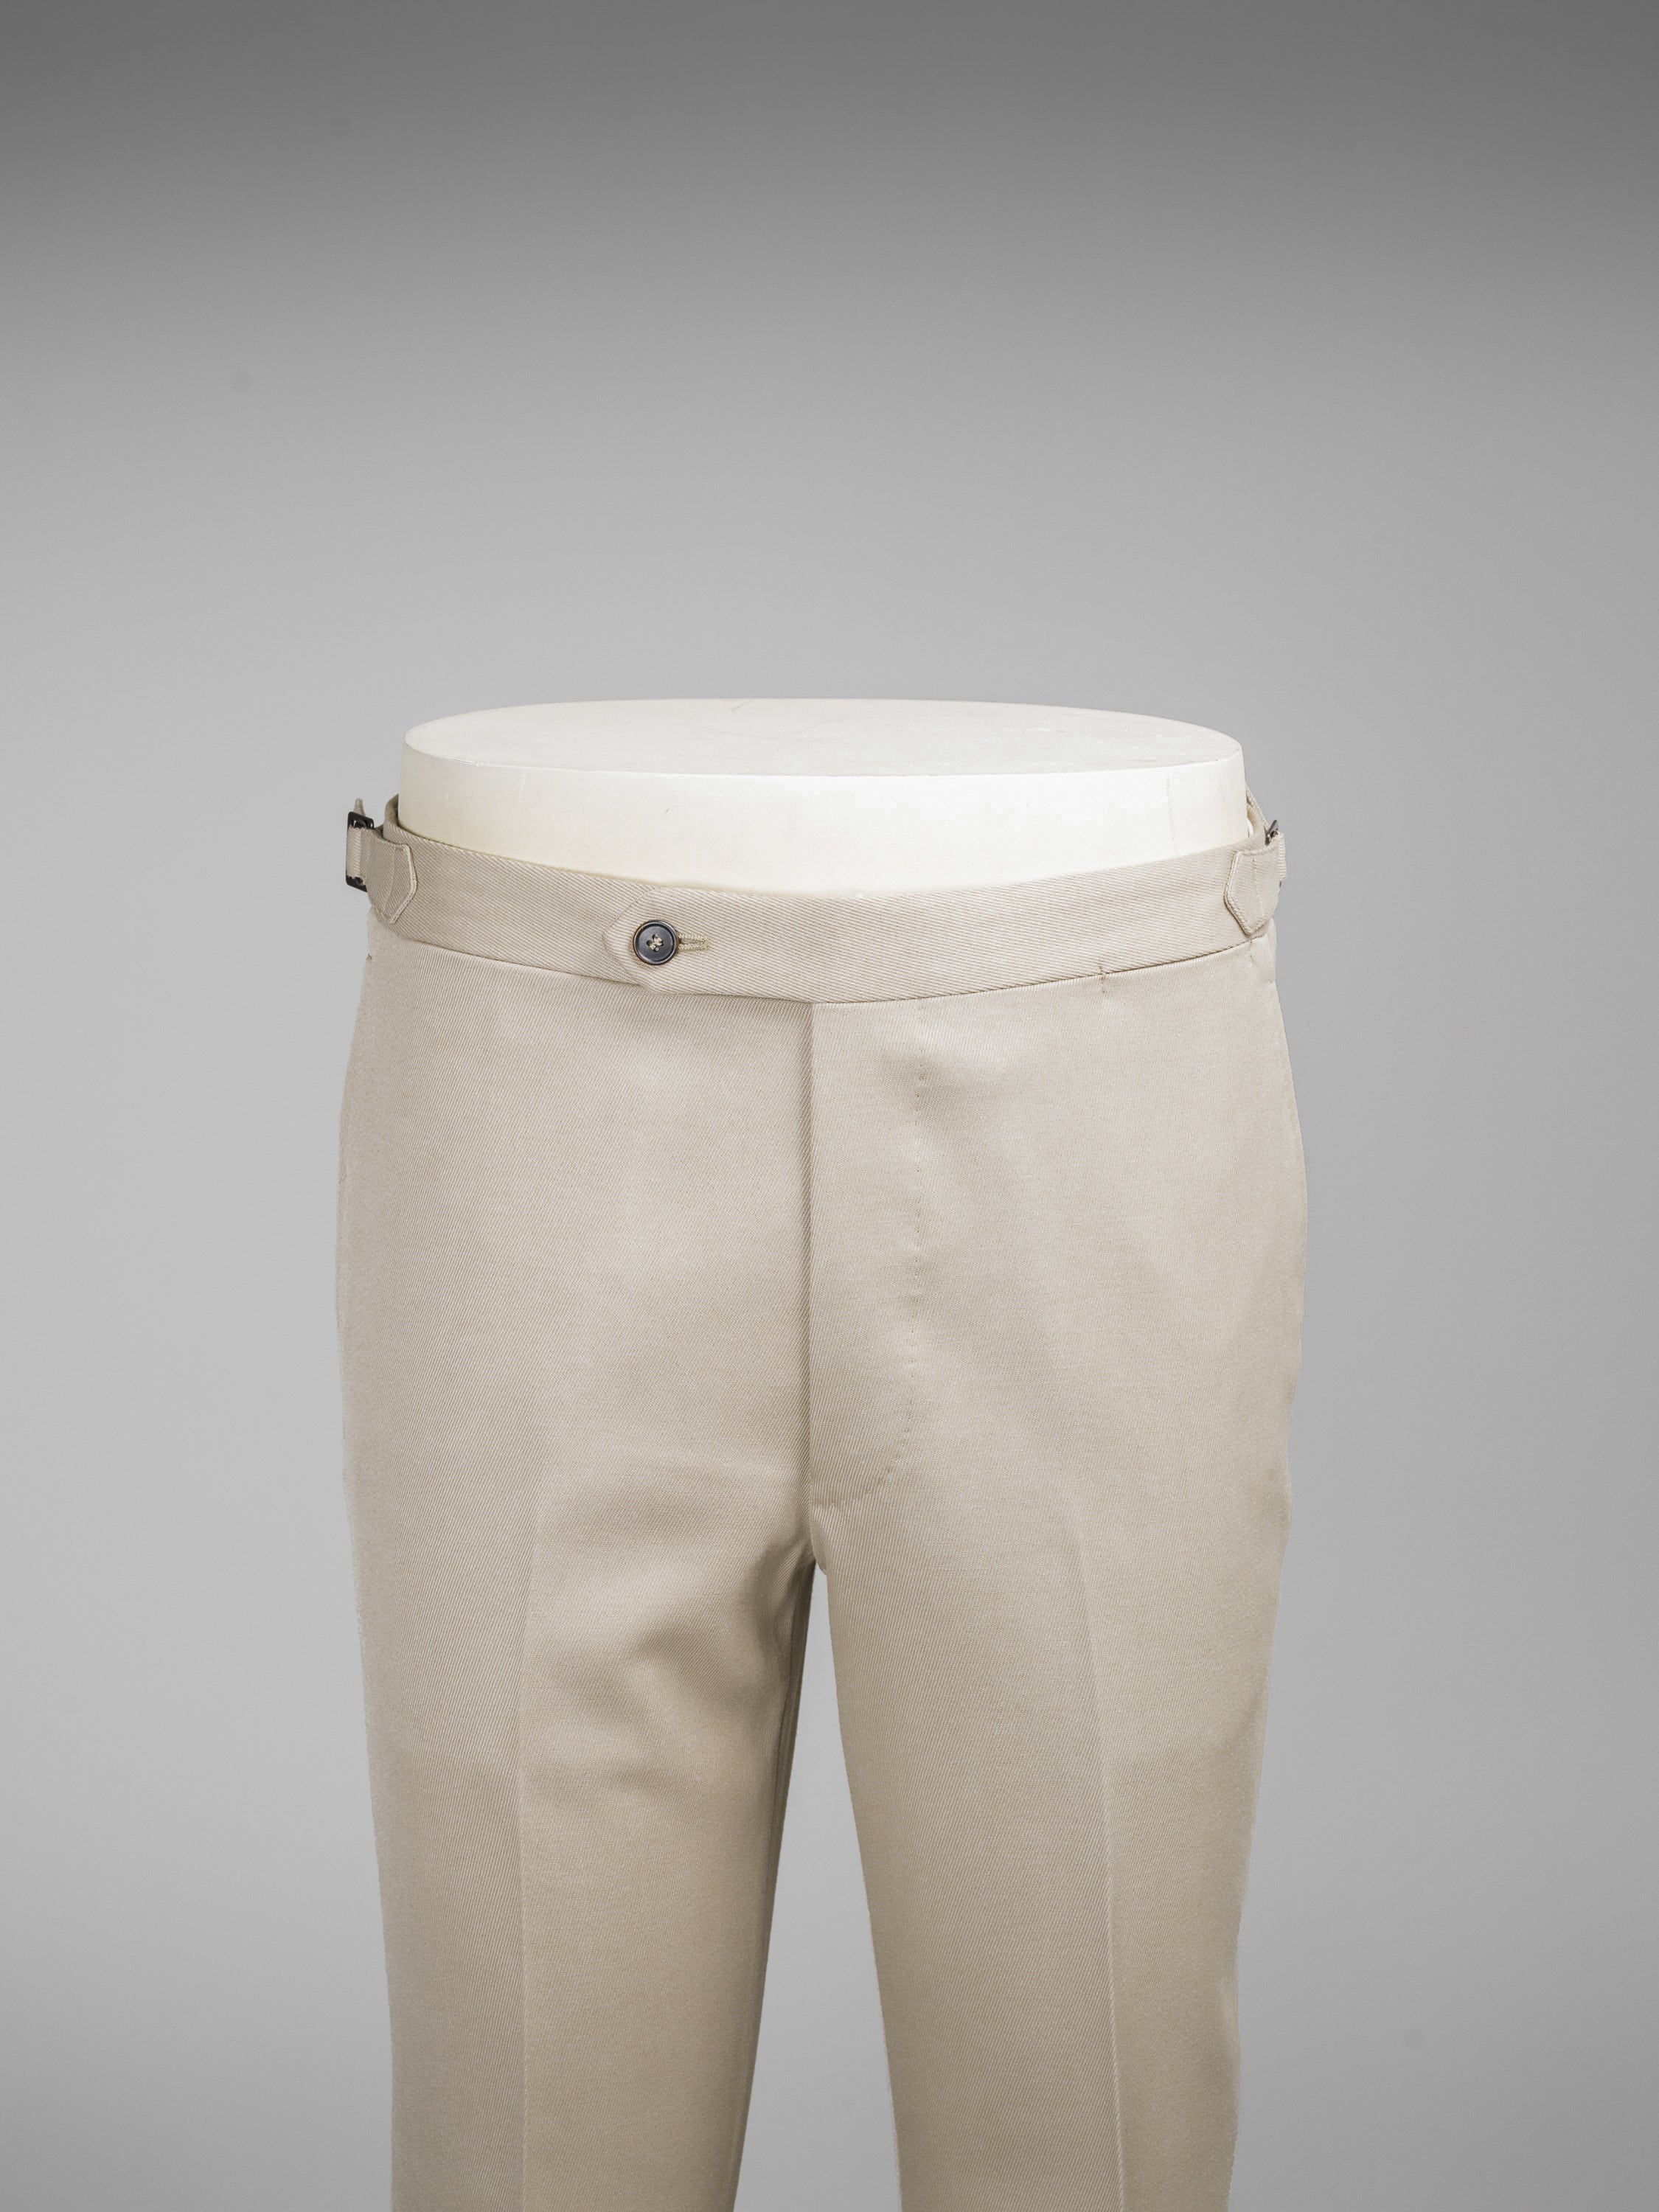 Mens Formal Trousers Cavalry Twill, Cavalry Twill Trousers